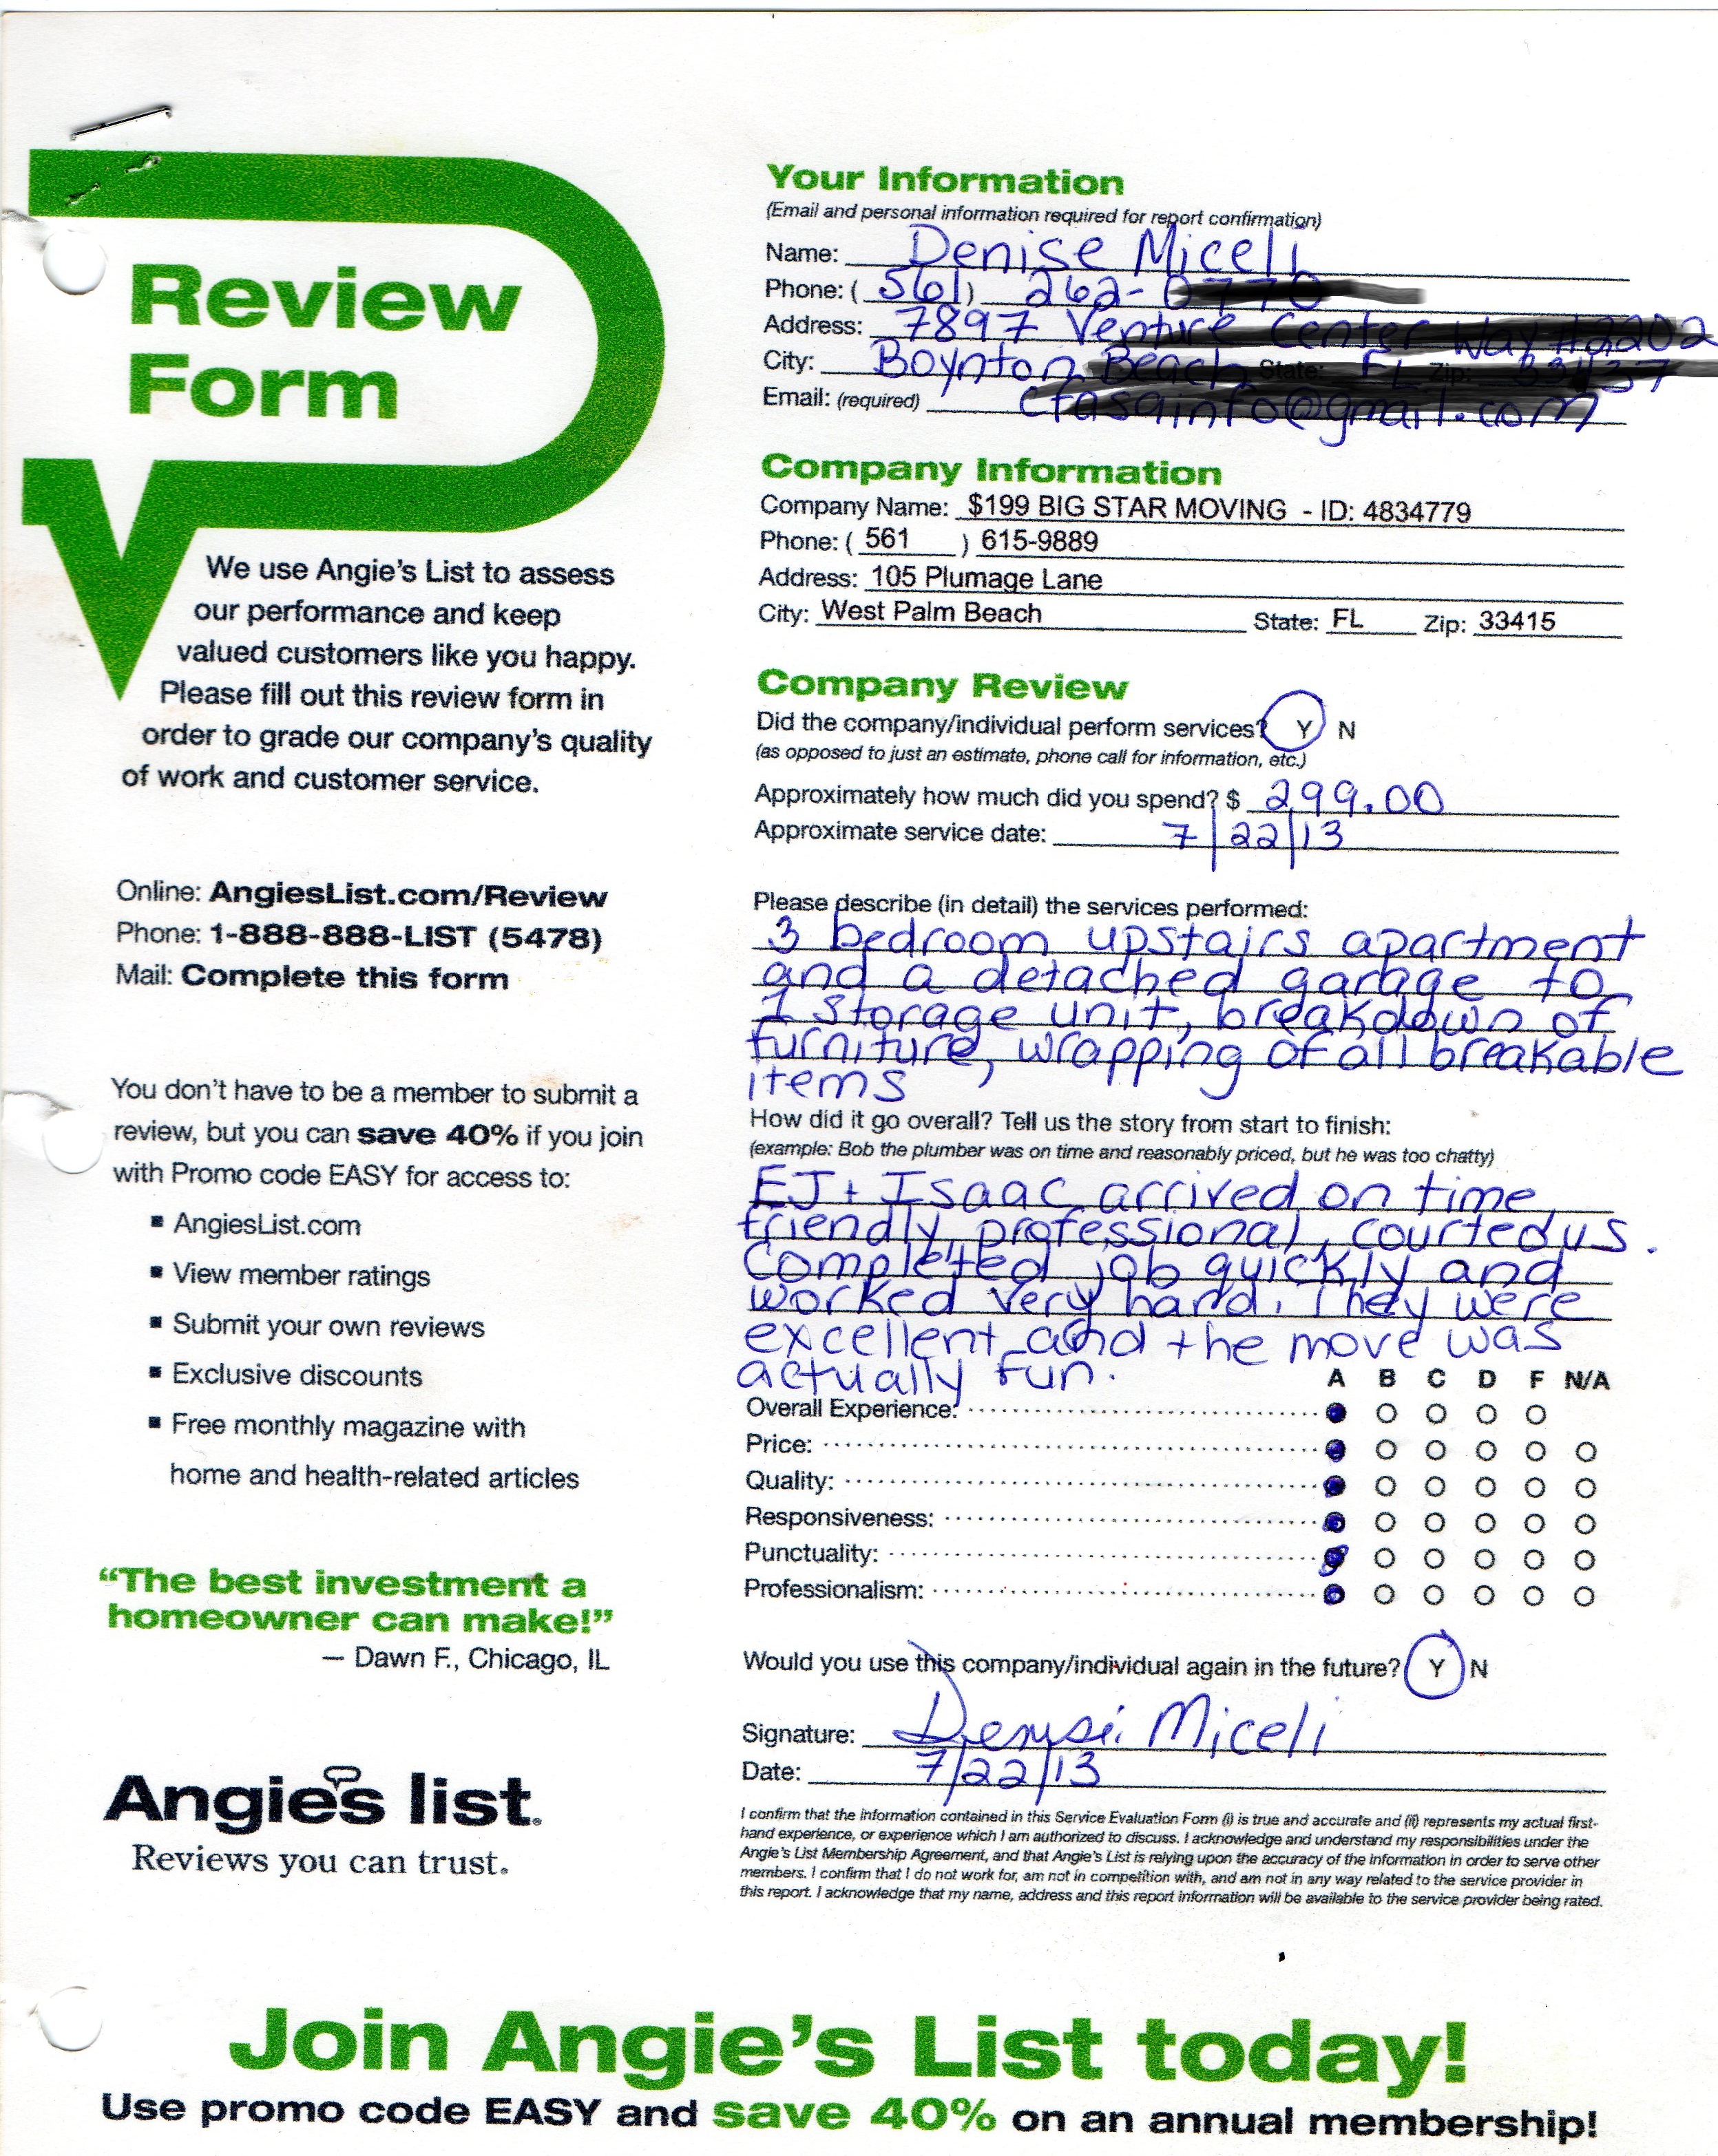 Review
Total 6 Big Star Moving Reviews
Rick Fox
5 Star Moving Rating
Mar 27, 2013
Moved within FL
Kudos to Big Star Moving for a job well done!!

I hired Big Star Moving for a move from West Palm beac